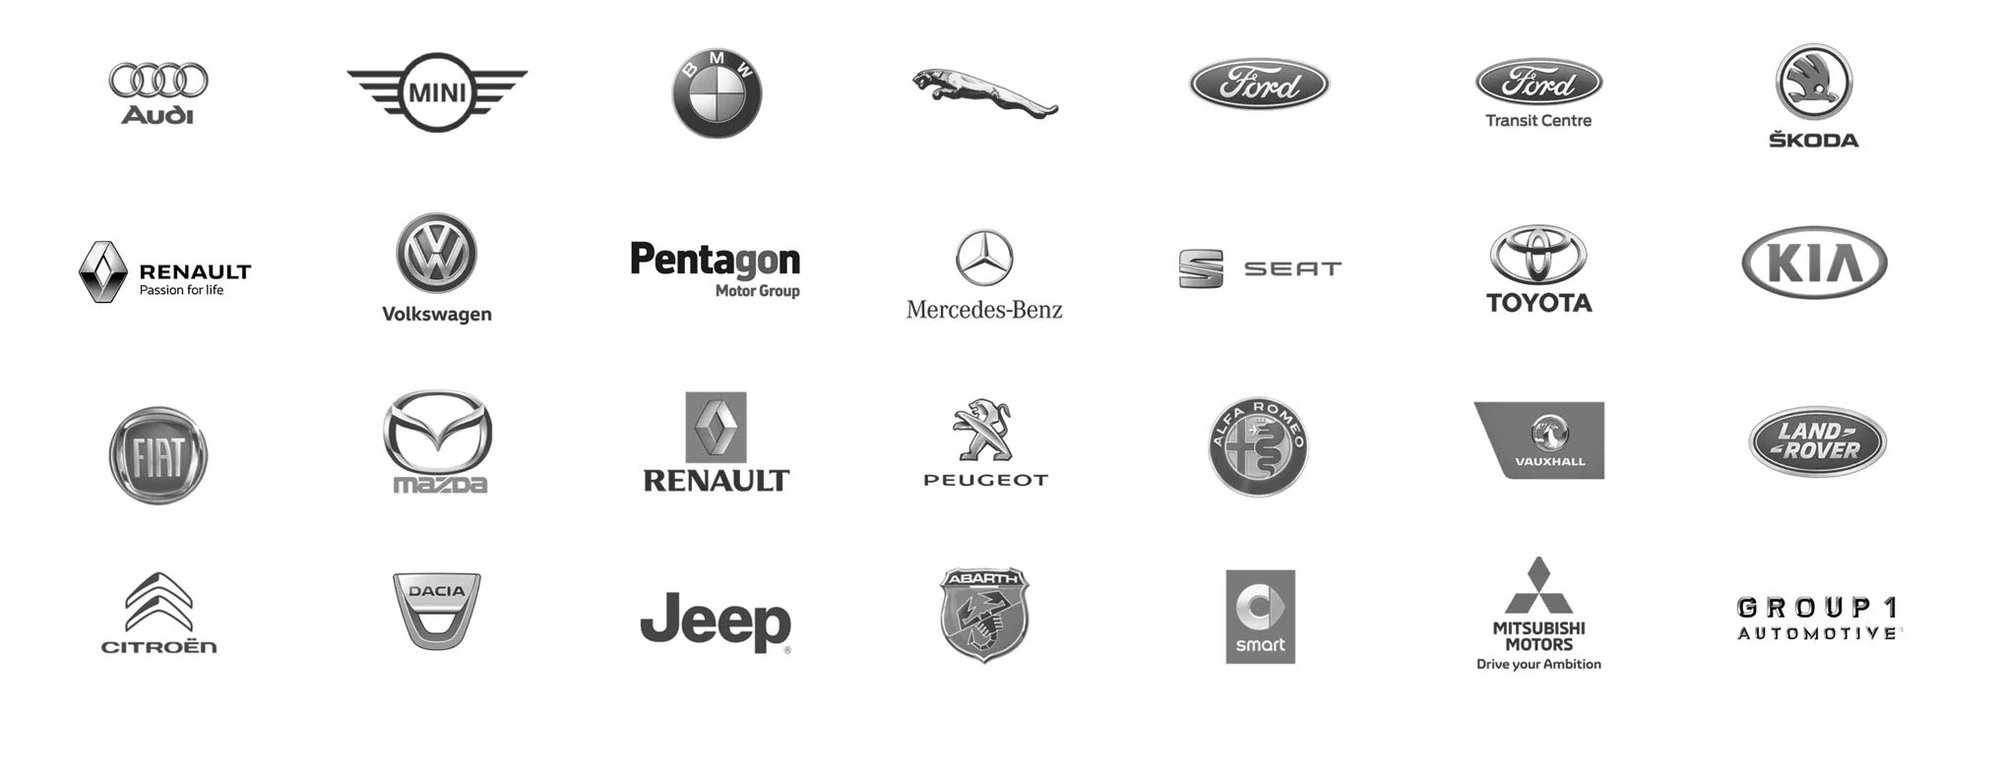 Automotive Brands & Dealerships we work with